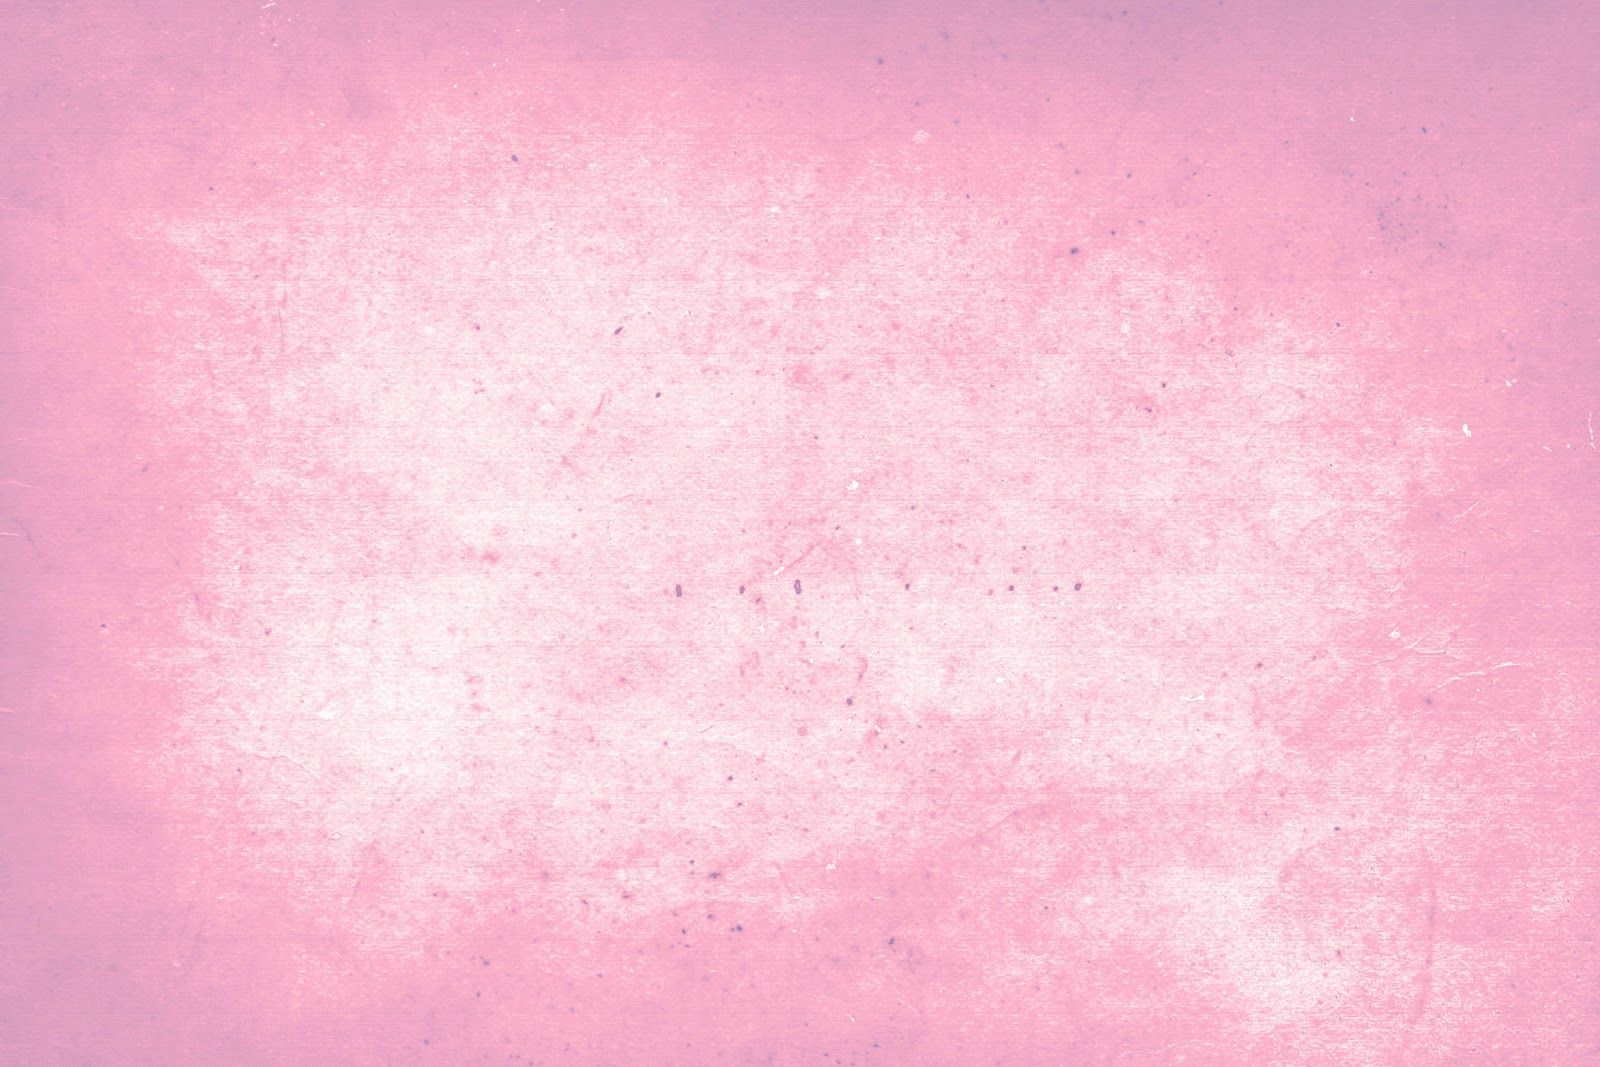 solid color background. Free Solid Color Grunge Textures. Pink background image, Pink wallpaper, Cute background